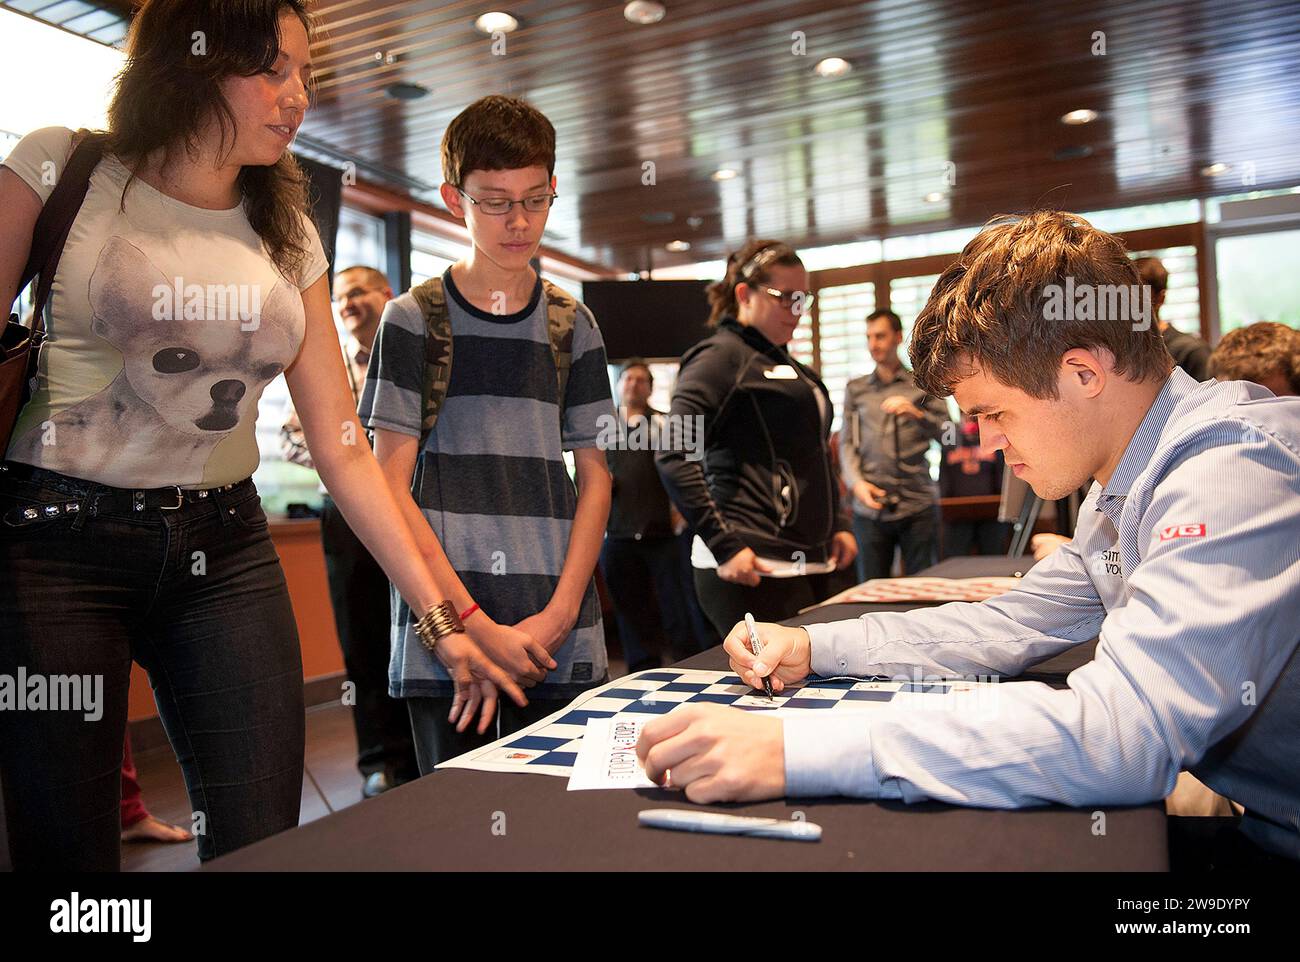 8 SEPT. 2013 -- ST. LOUIS -- Norwegian chess grandmaster Magnus Carlsen (right) signs autographs for Isaac Adams (center) and his mother Dora Jara, wh Stock Photo